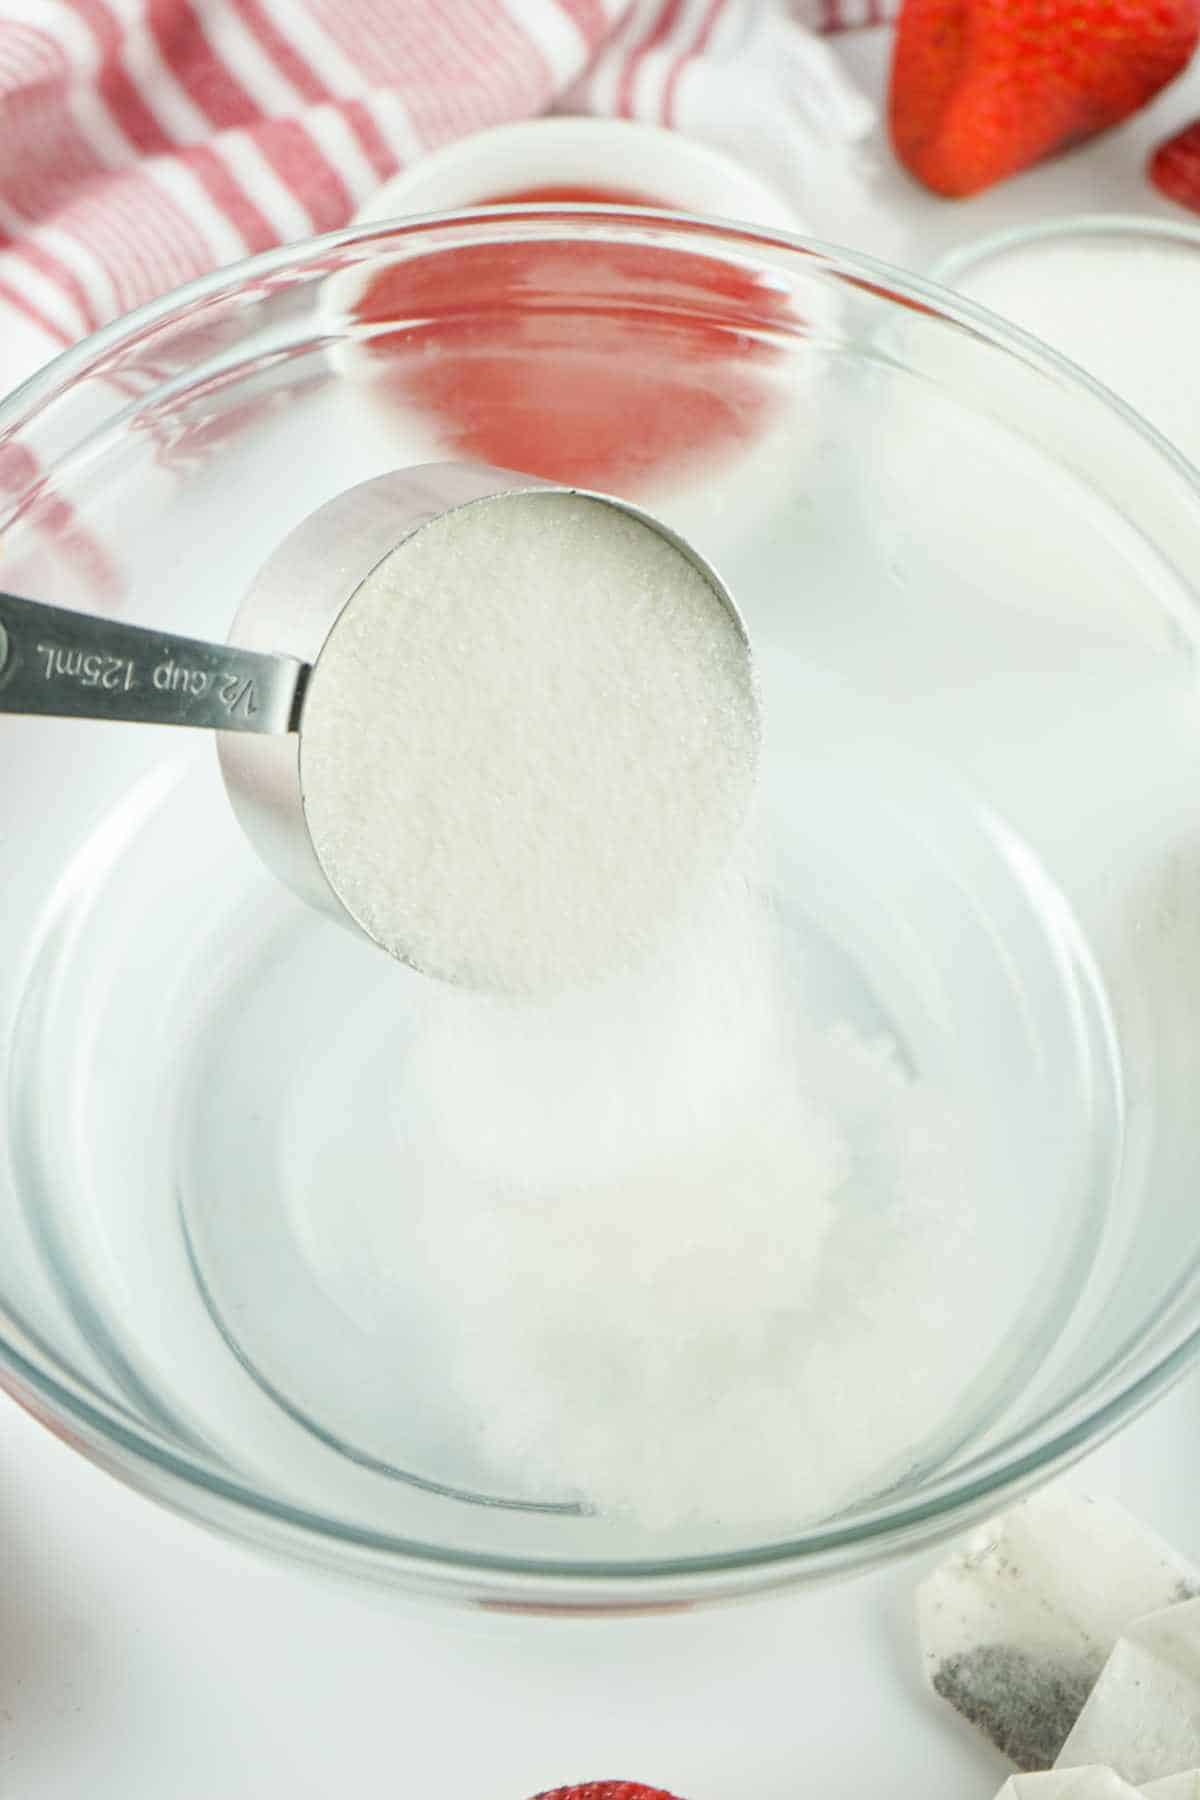 sugar added to boiled hot water in a bowl.